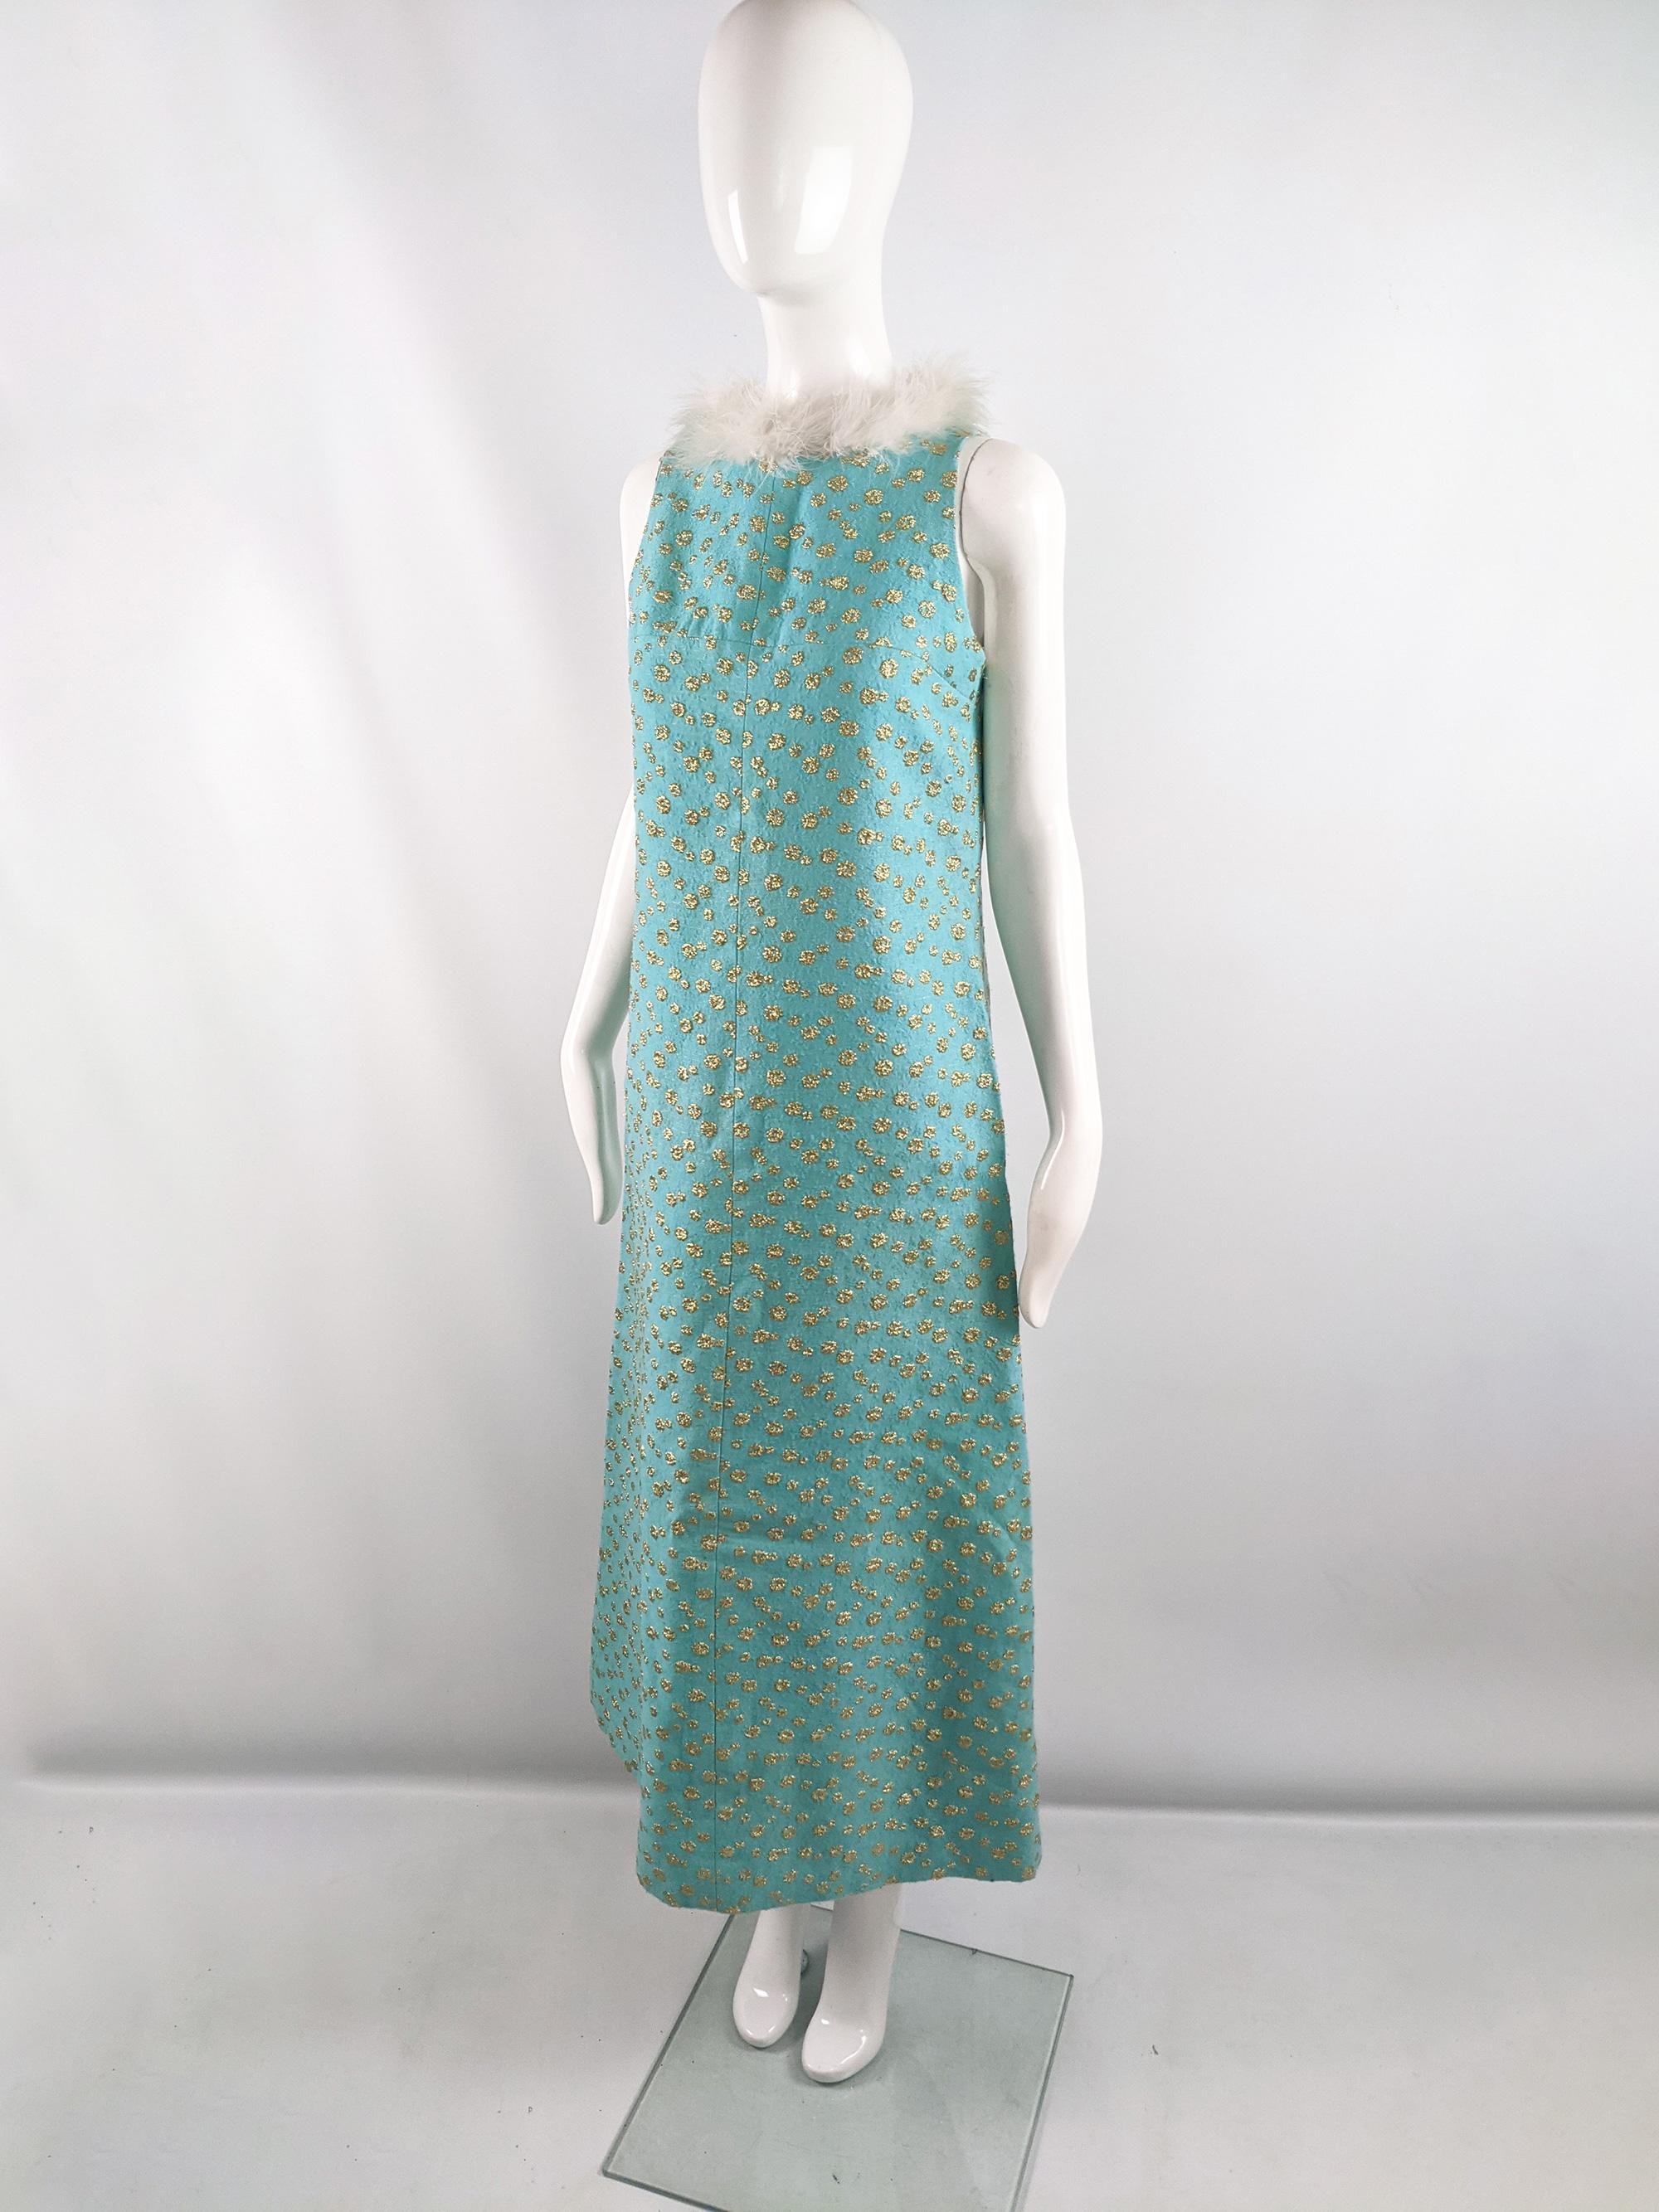 Blue Alice Edwards Vintage Turquoise & Gold Brocade Evening Party Column Dress 1960s